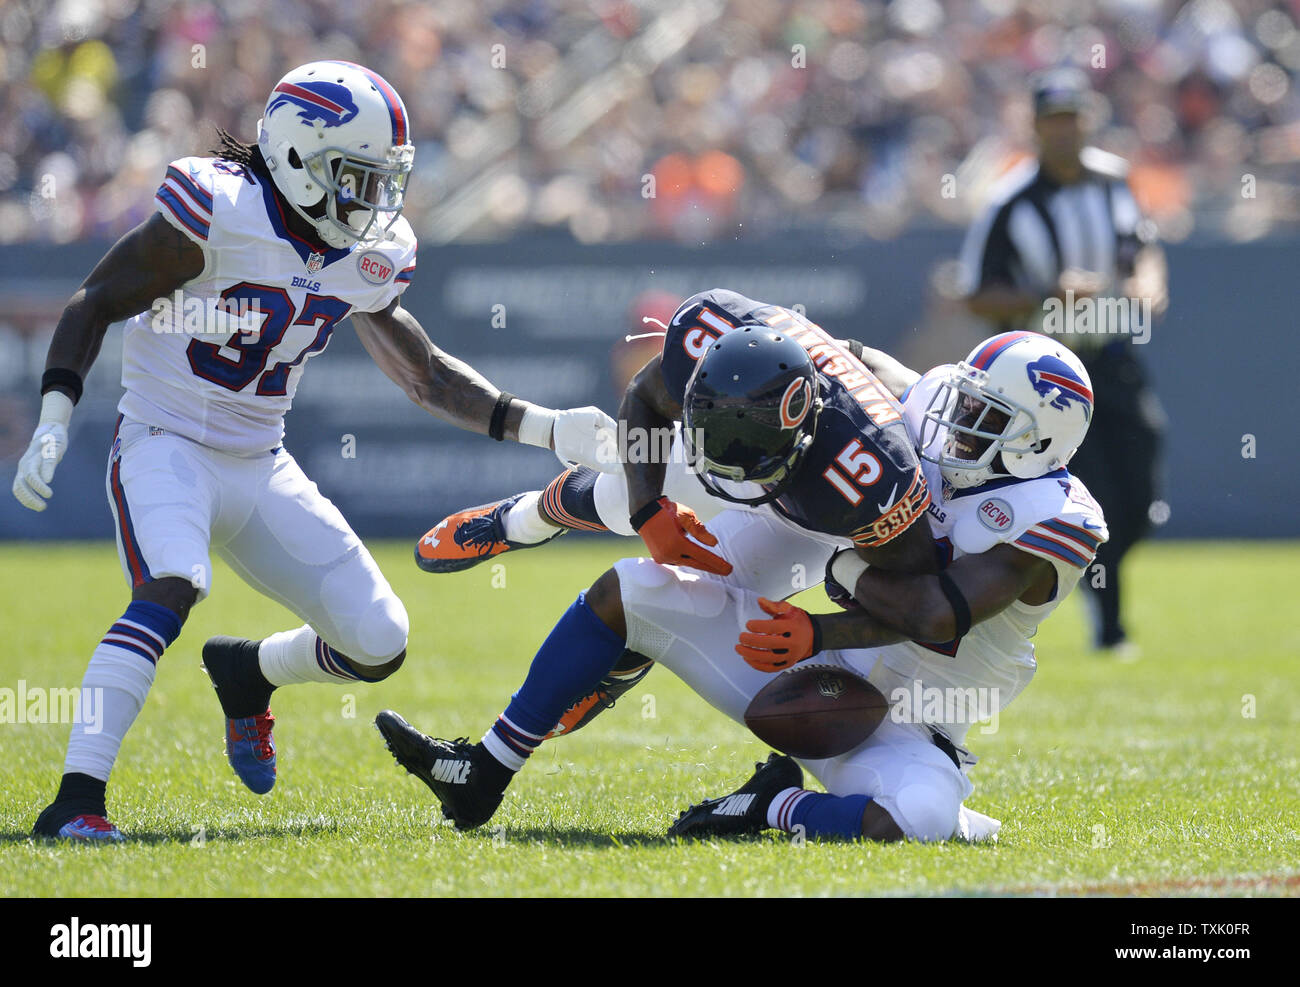 Buffalo Bills cornerback Leodis McKelvin (R) strips the ball from Chicago Bears wide receiver Brandon Marshall (C) as defensive back Nickell Robey helps out during the second quarter at Soldier Field on September 7, 2014 in Chicago. The Bills recovered the fumble.     UPI/Brian Kersey Stock Photo